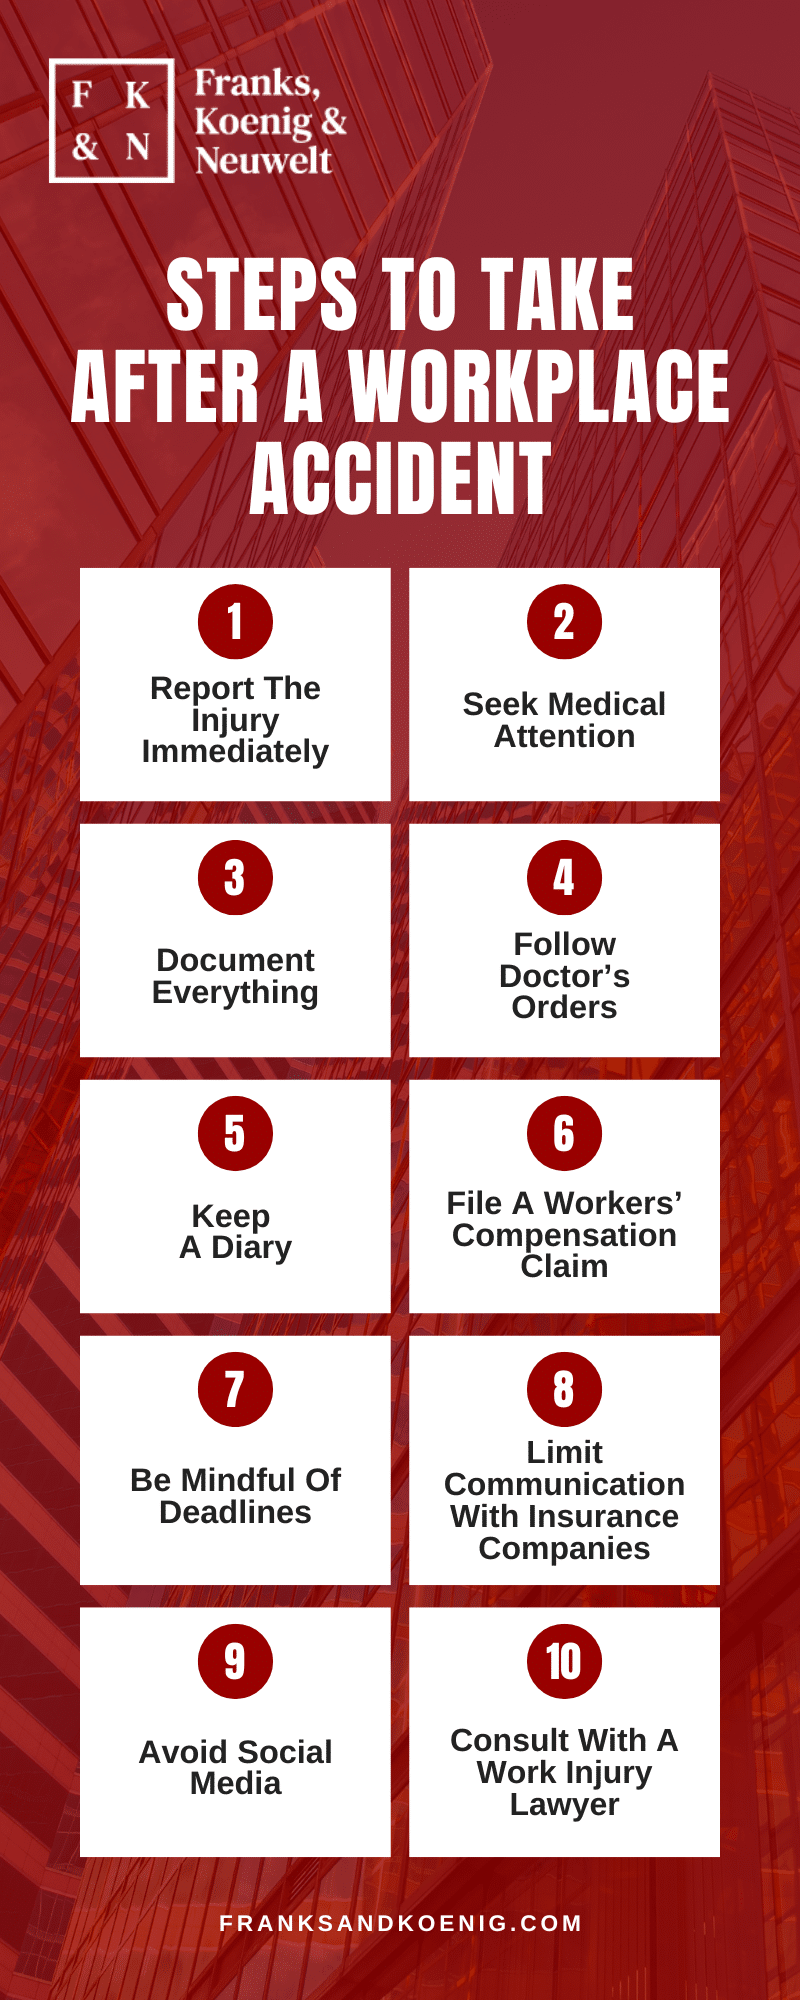 Steps To Take After A Workplace Accident Infographic